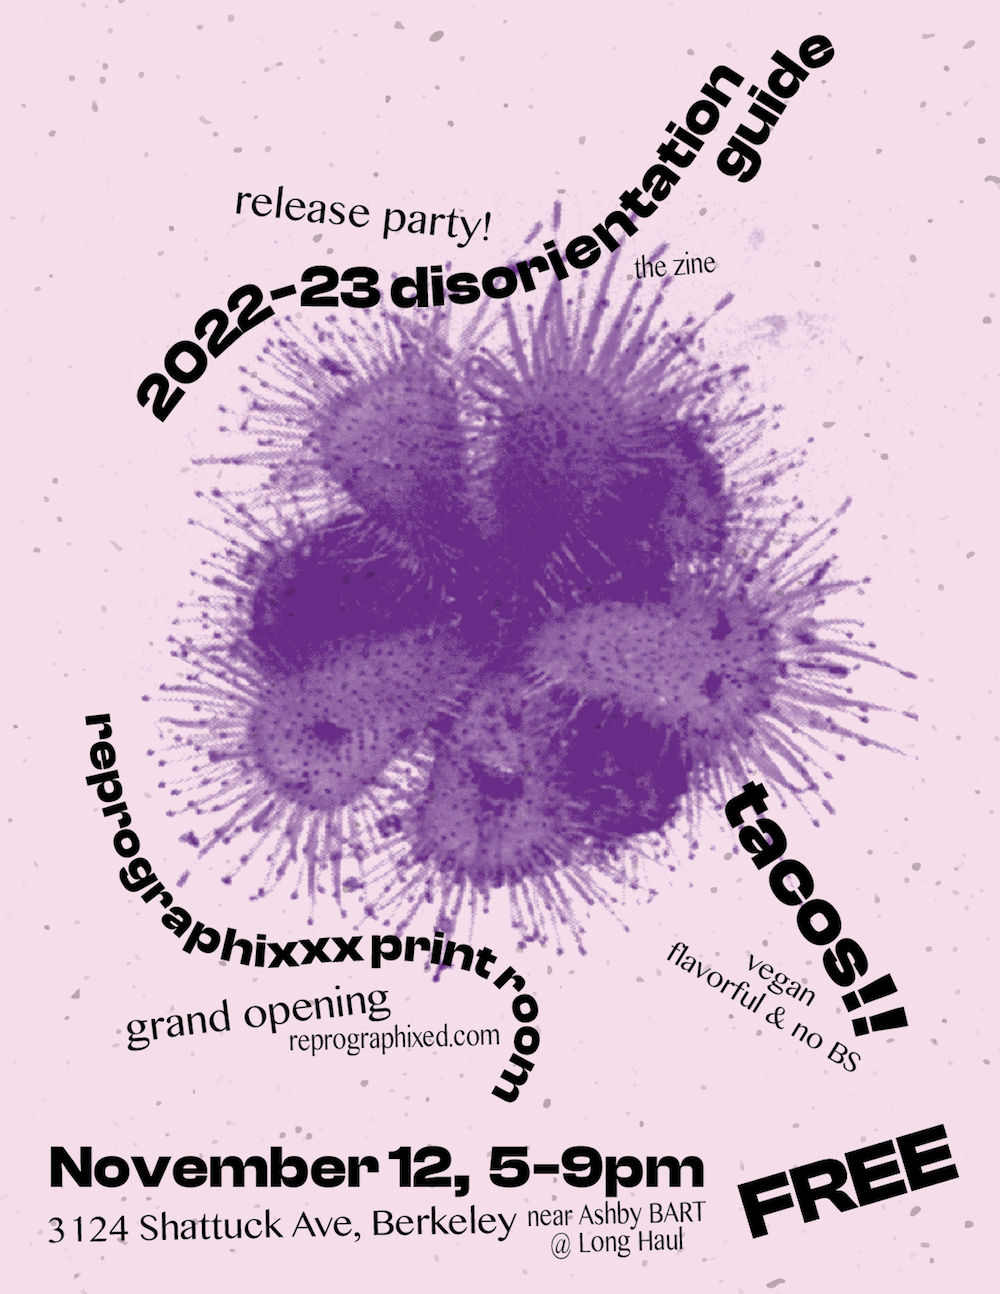 Event flyer for disorientation party